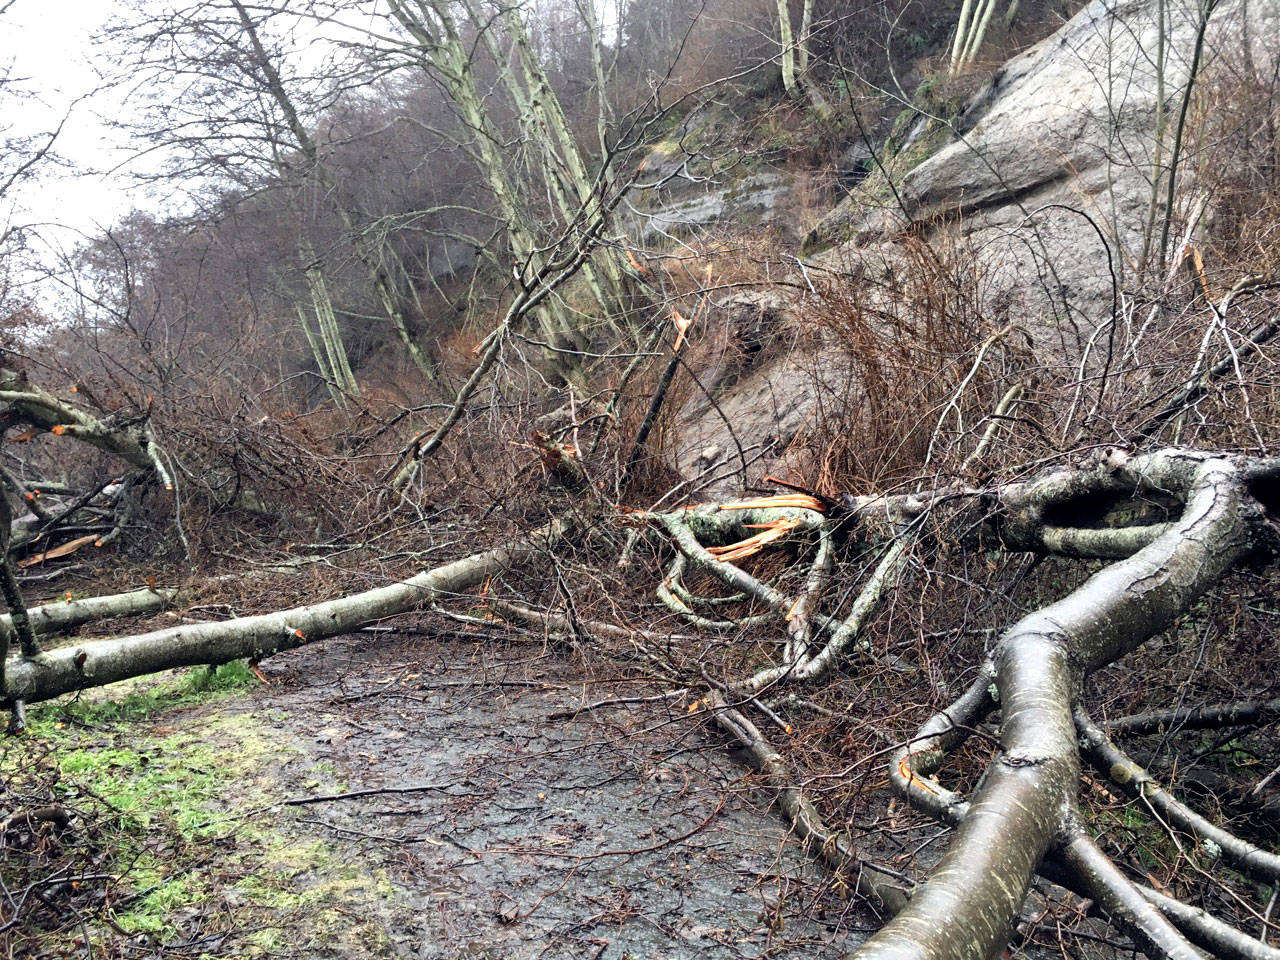 A mudslide covers a section of the Olympic Discovery Trail between the Ennis Street trailhead and Morse Creek trestle east of Port Angeles on Wednesday, Jan. 22, 2020. (Rob Ollikainen/Peninsula Daily News)